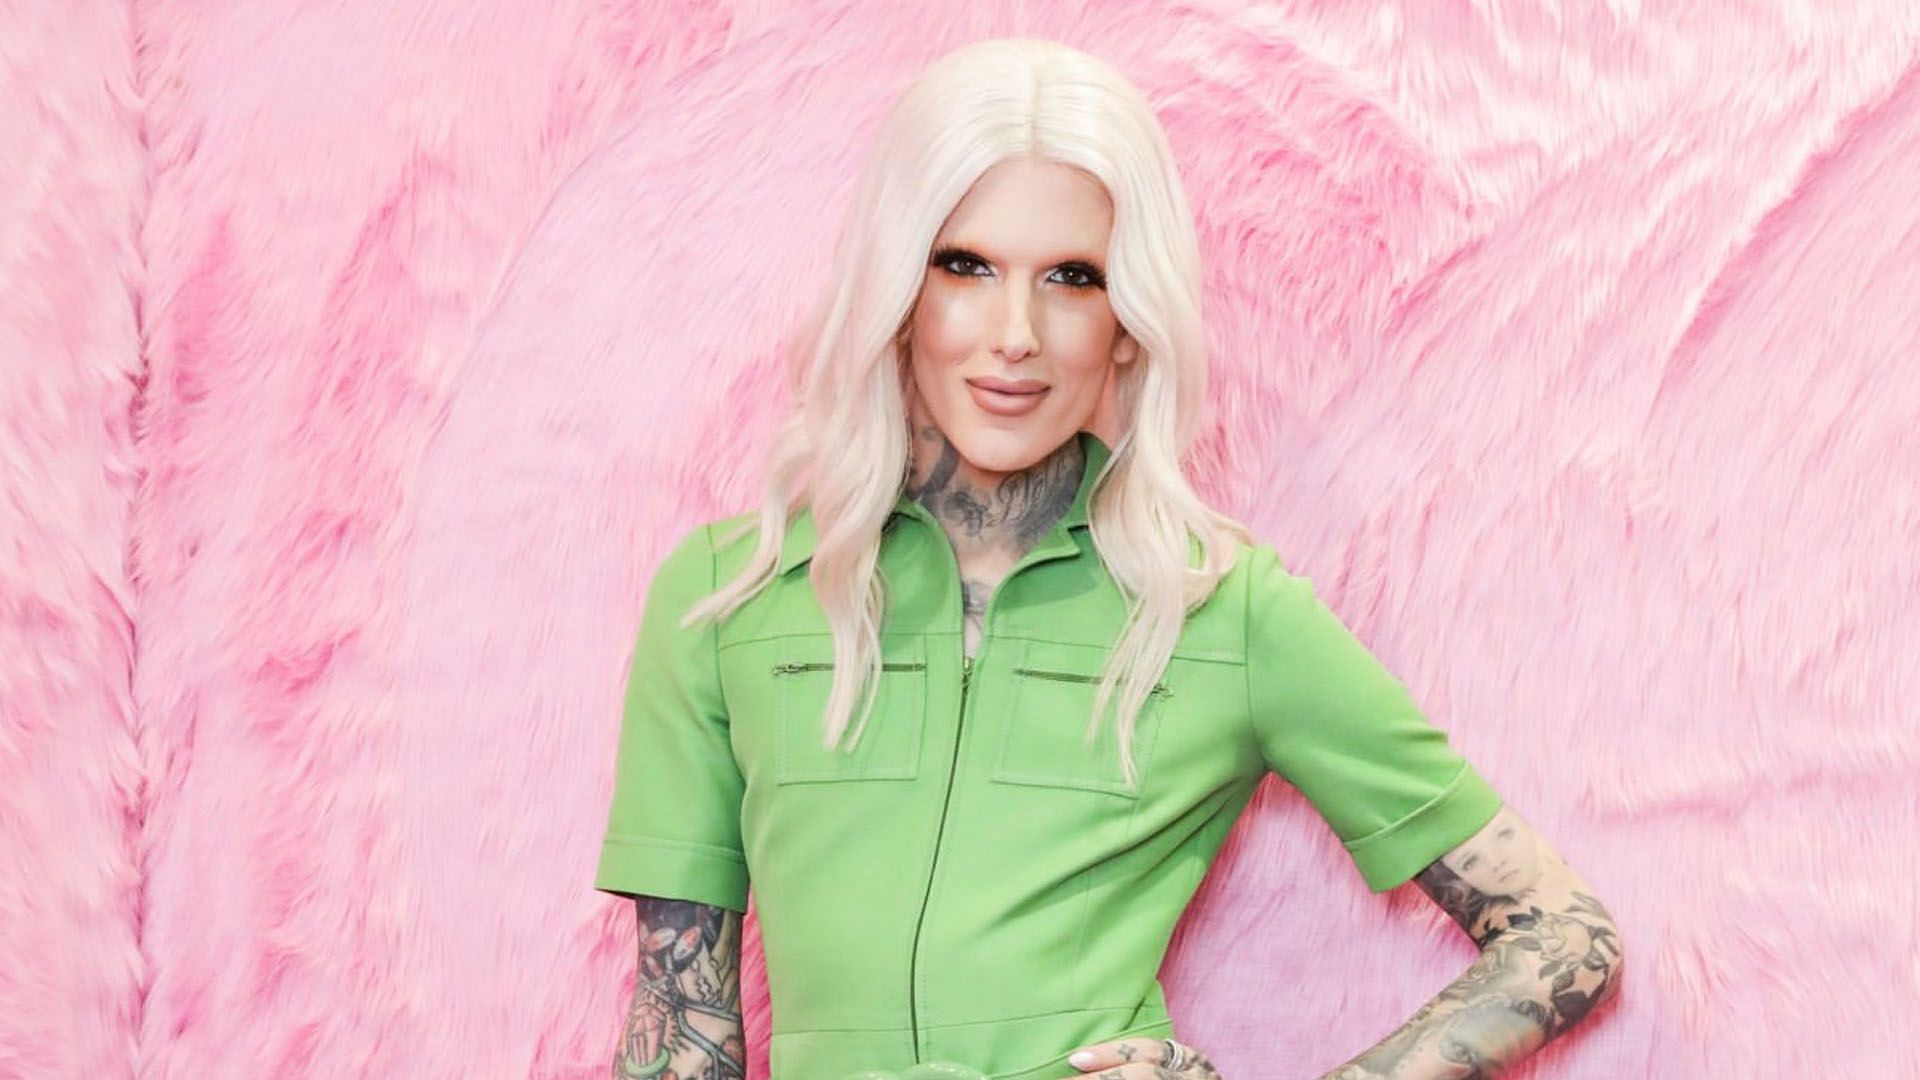 What did Jeffree Star say about Britney Spears and Kanye? Makeup guru tweets about Illuminati and “Hollywood elite”